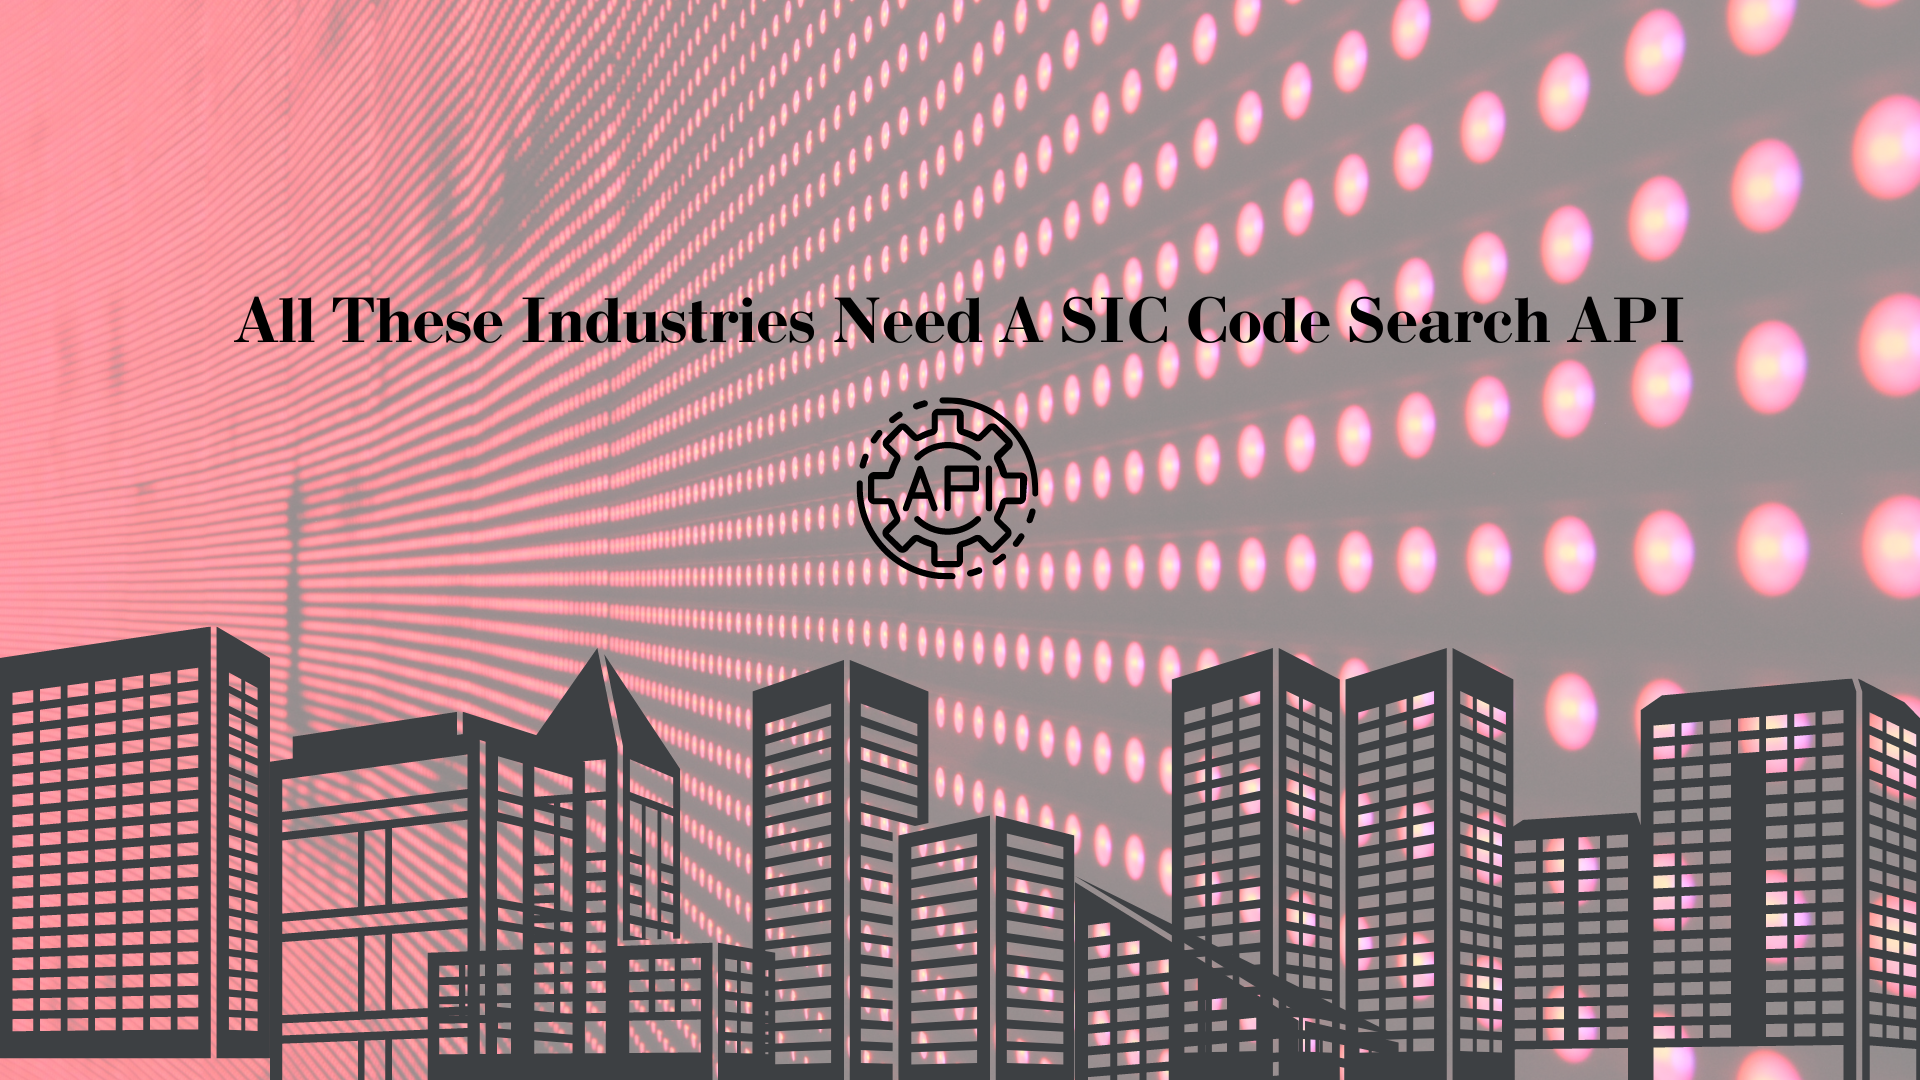 All These Industries Need A SIC Code Search API